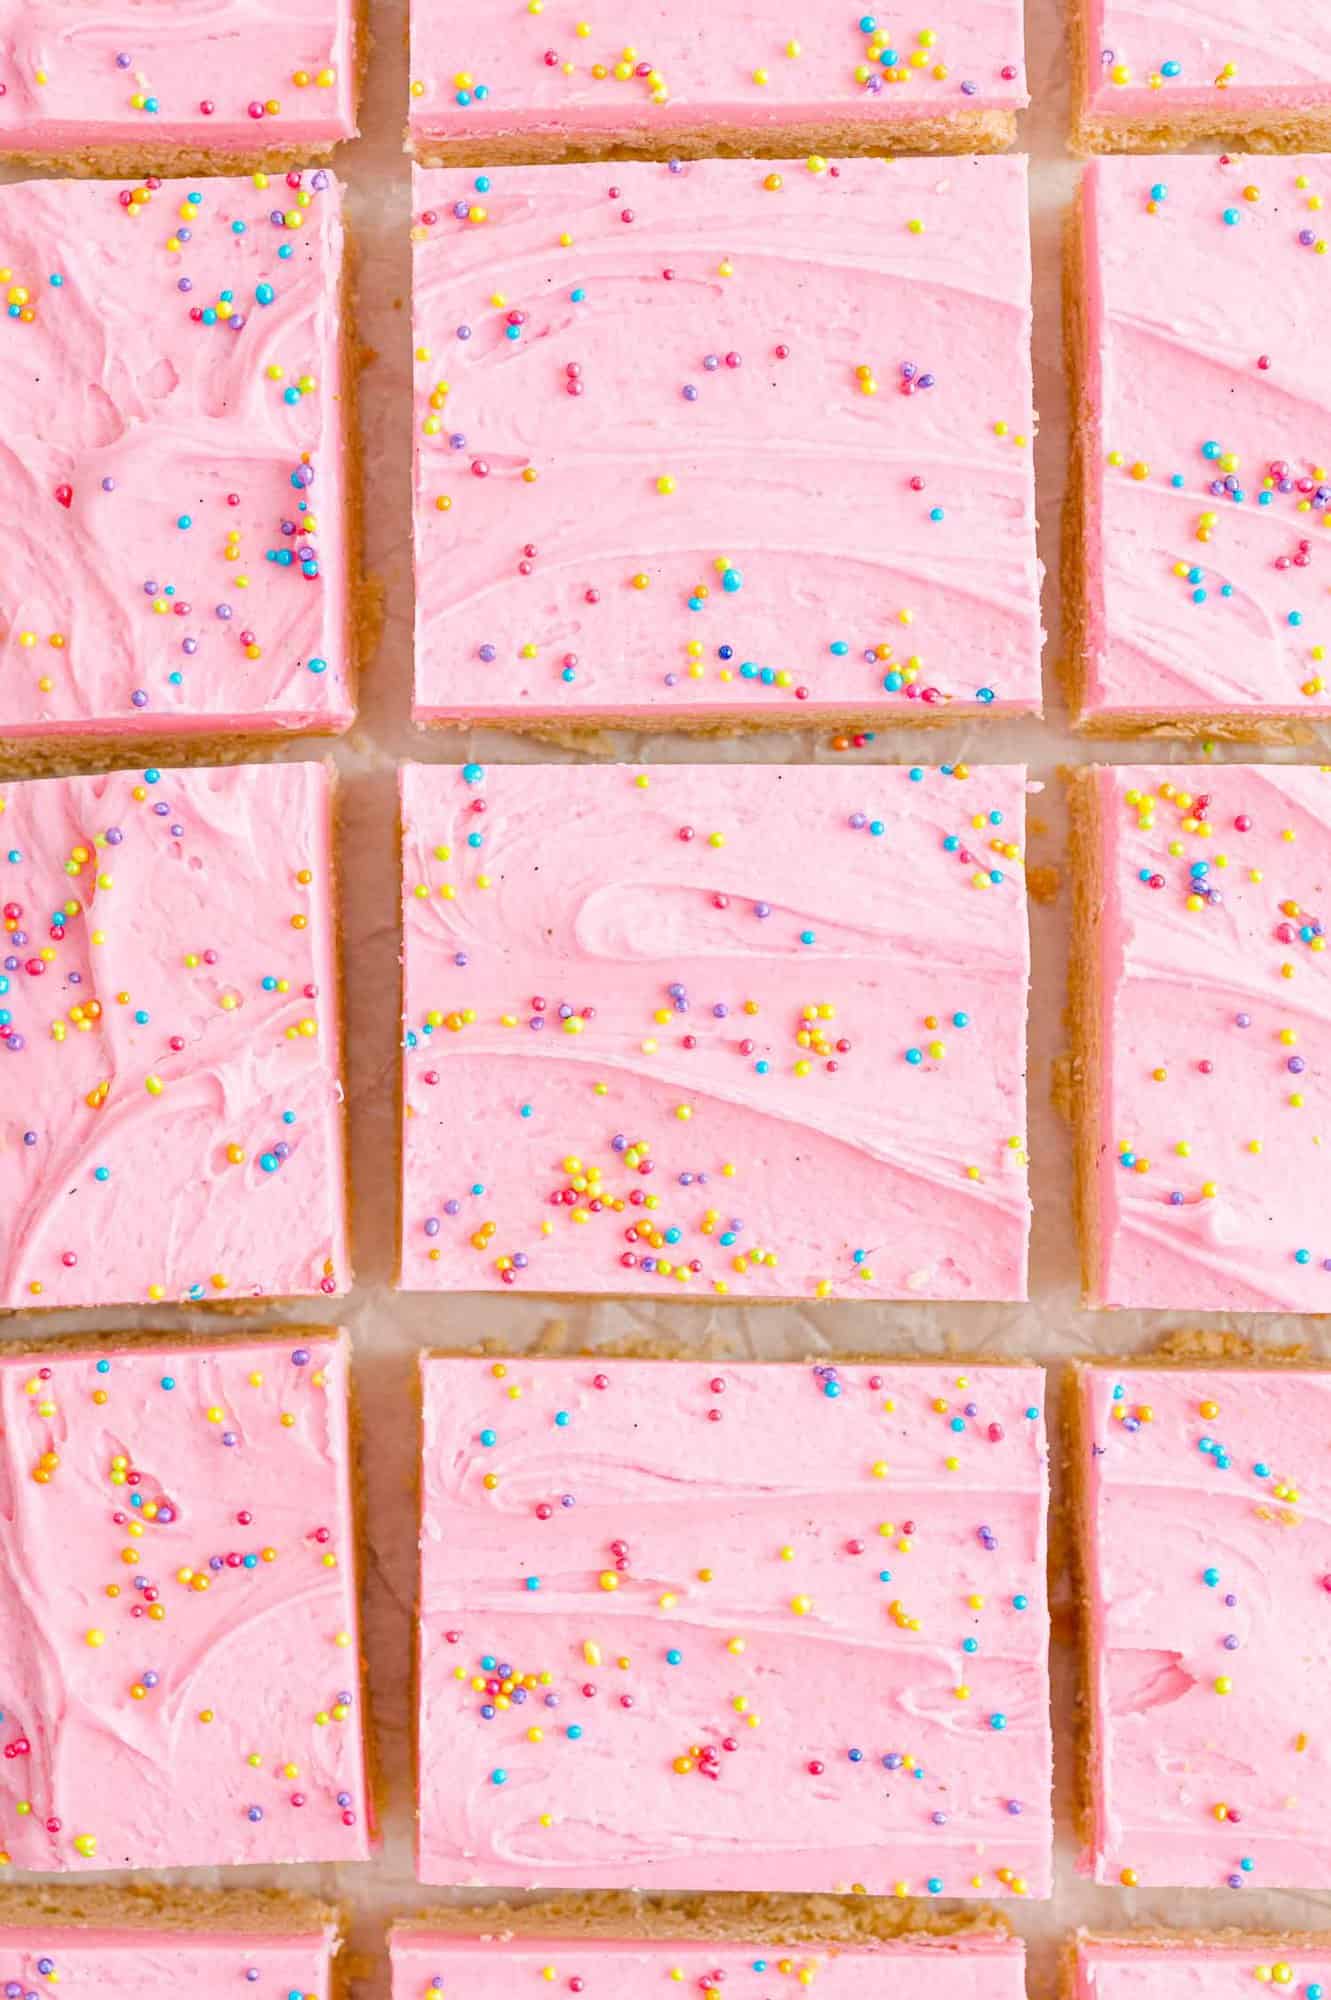 Cookie bars with pink frosting, viewed from above.